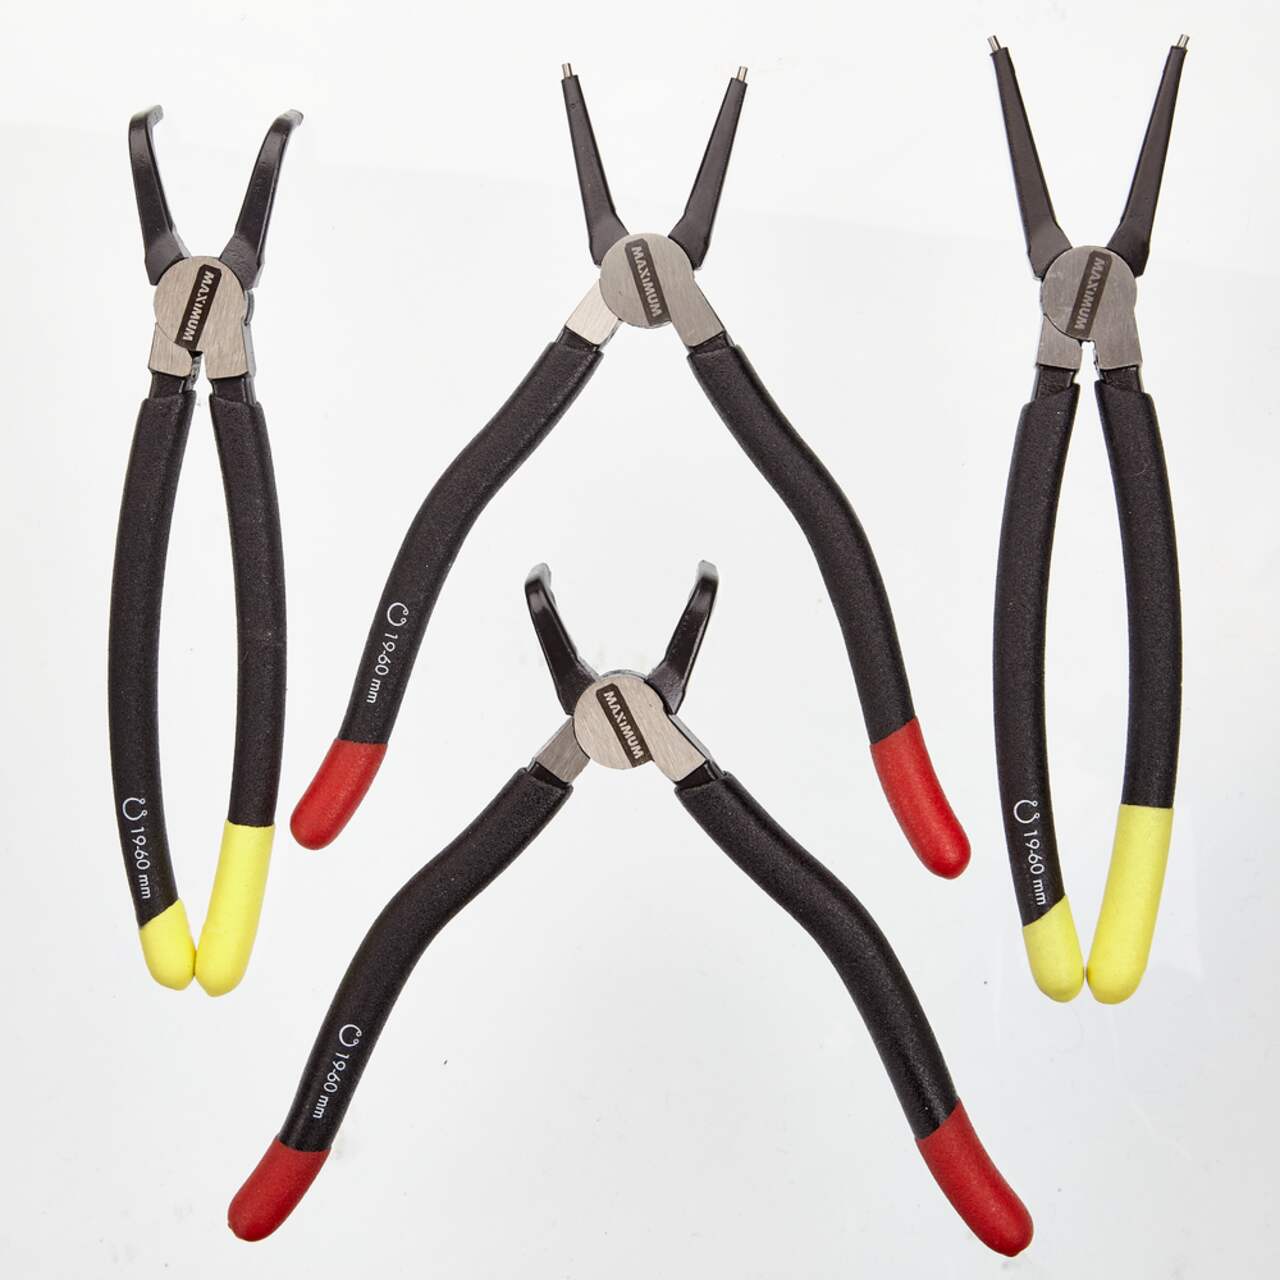 MAXIMUM Snap Ring Pliers Set, High-Quality Forged Tool Steel, Soft